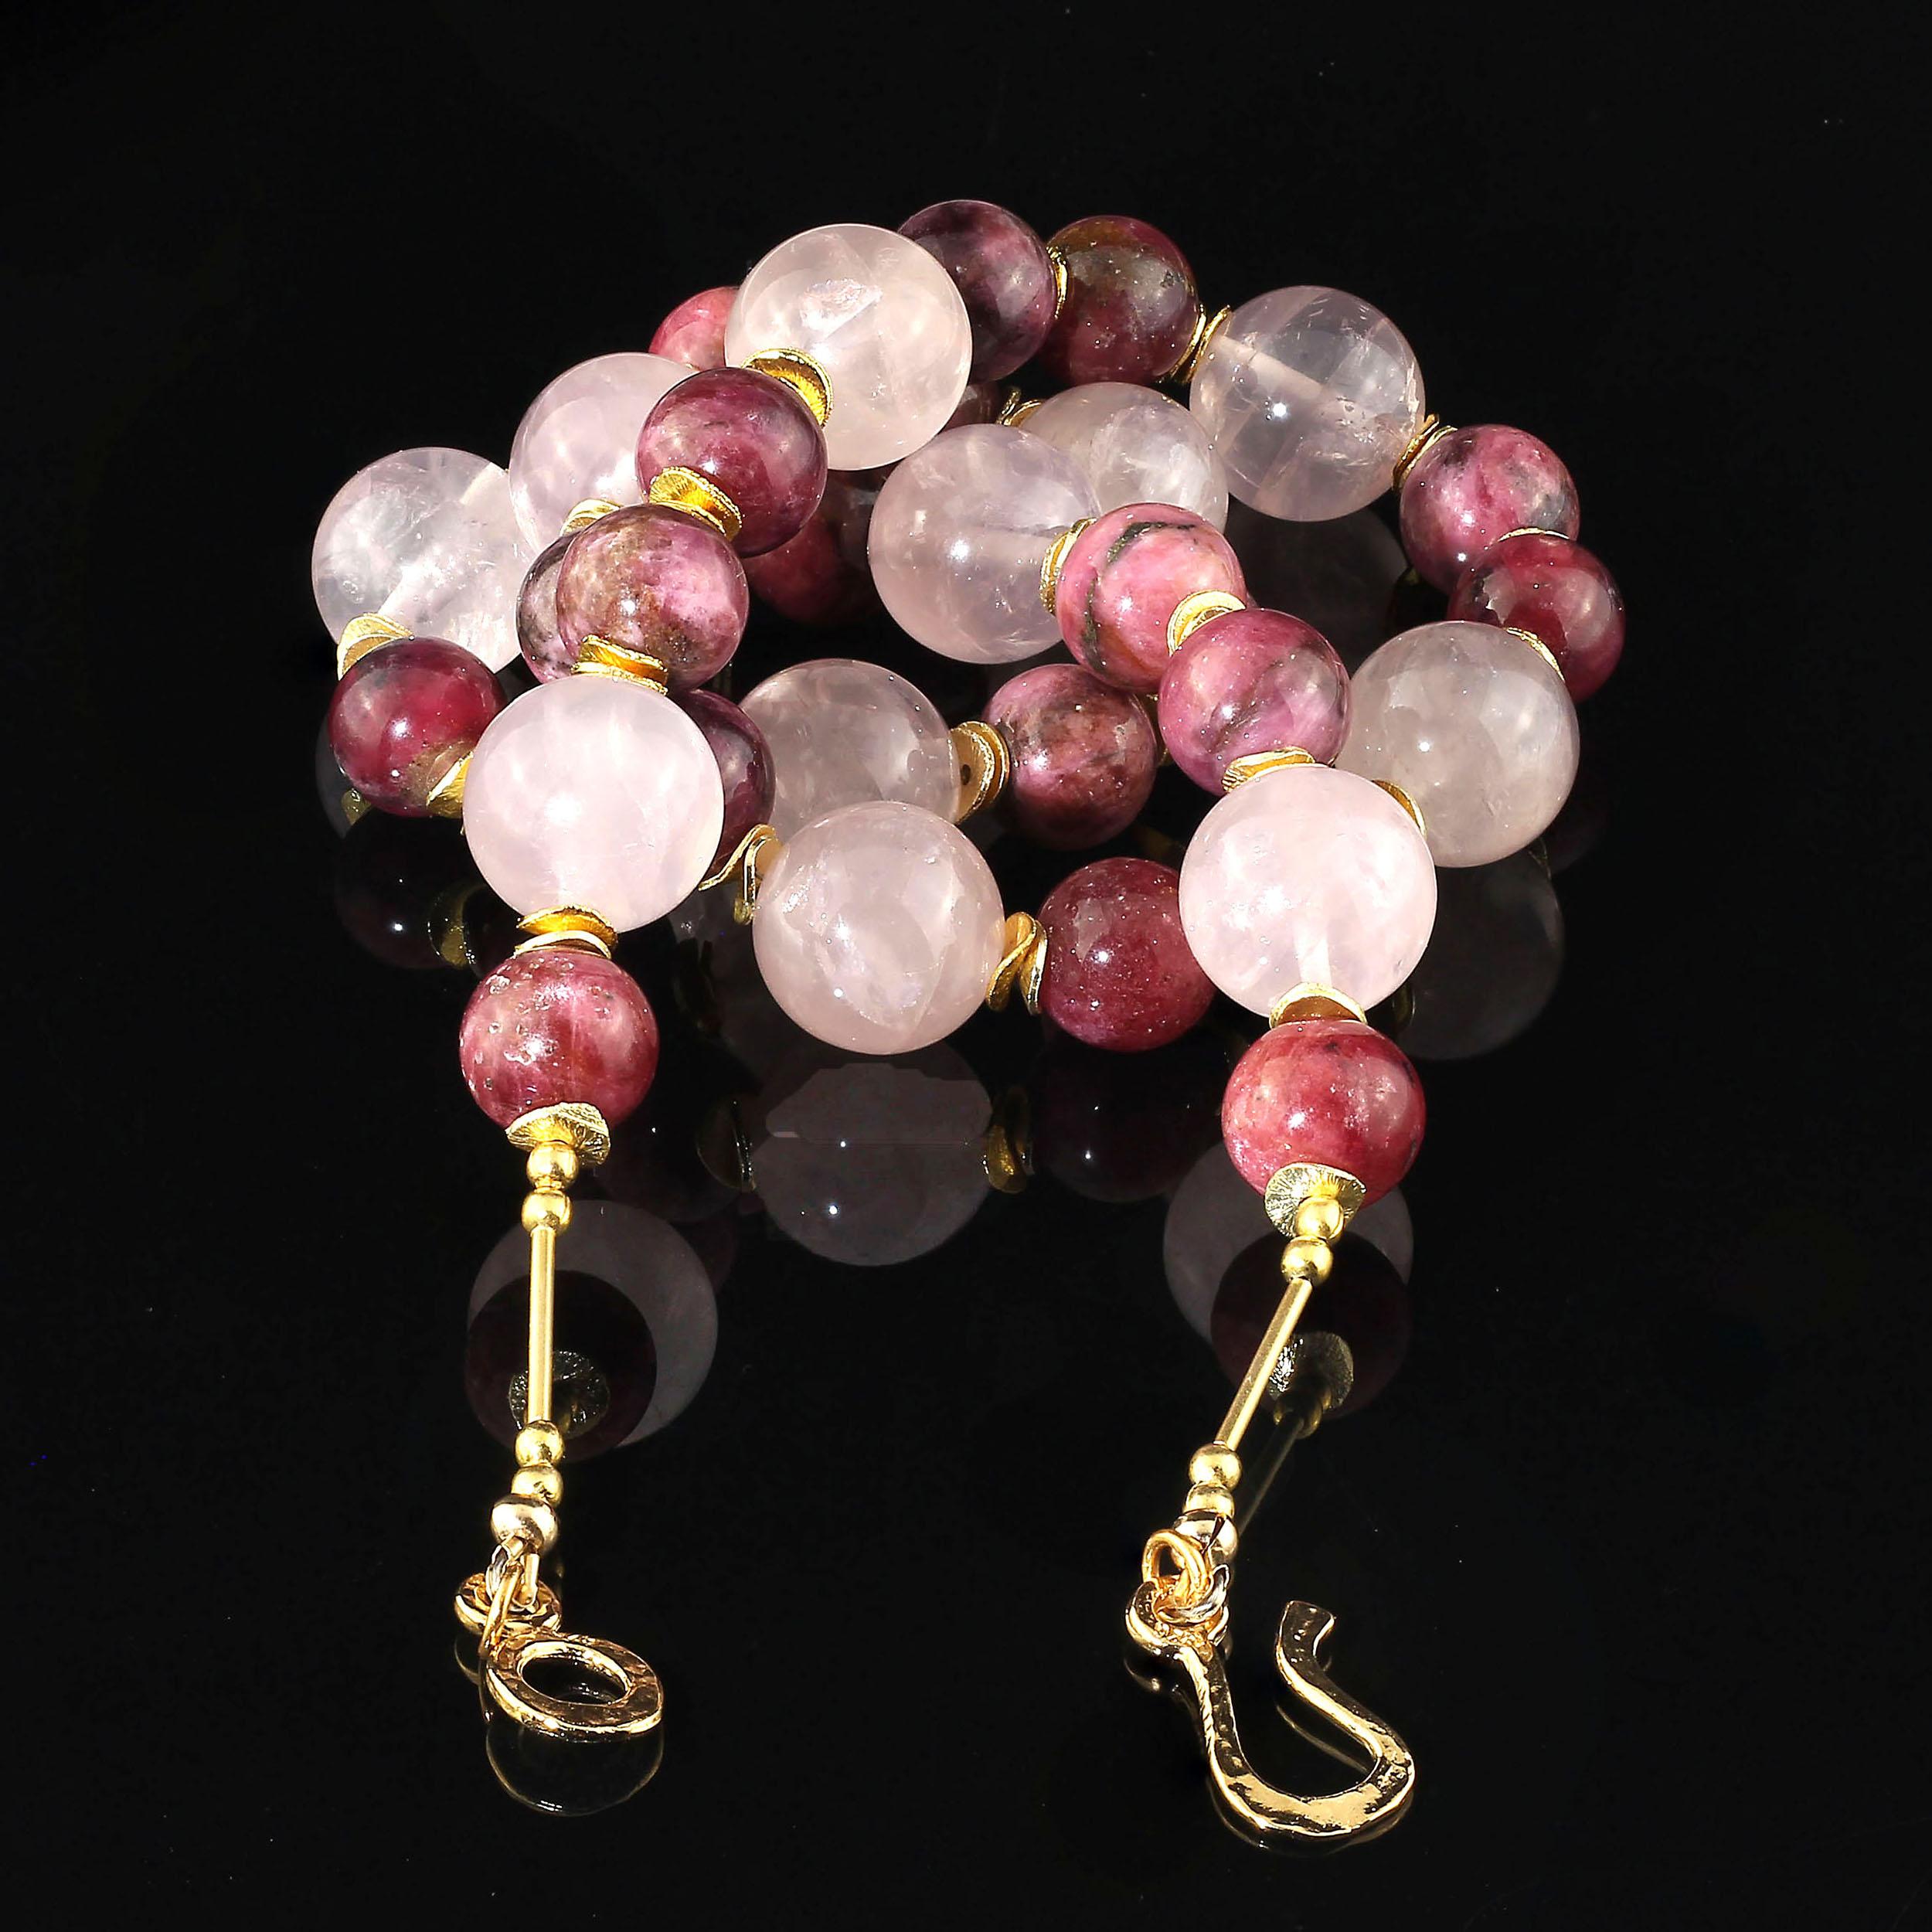 Women's or Men's AJD 24 Inch Necklace of Polished Rhodonite and Rose Quartz  Great Gift!!